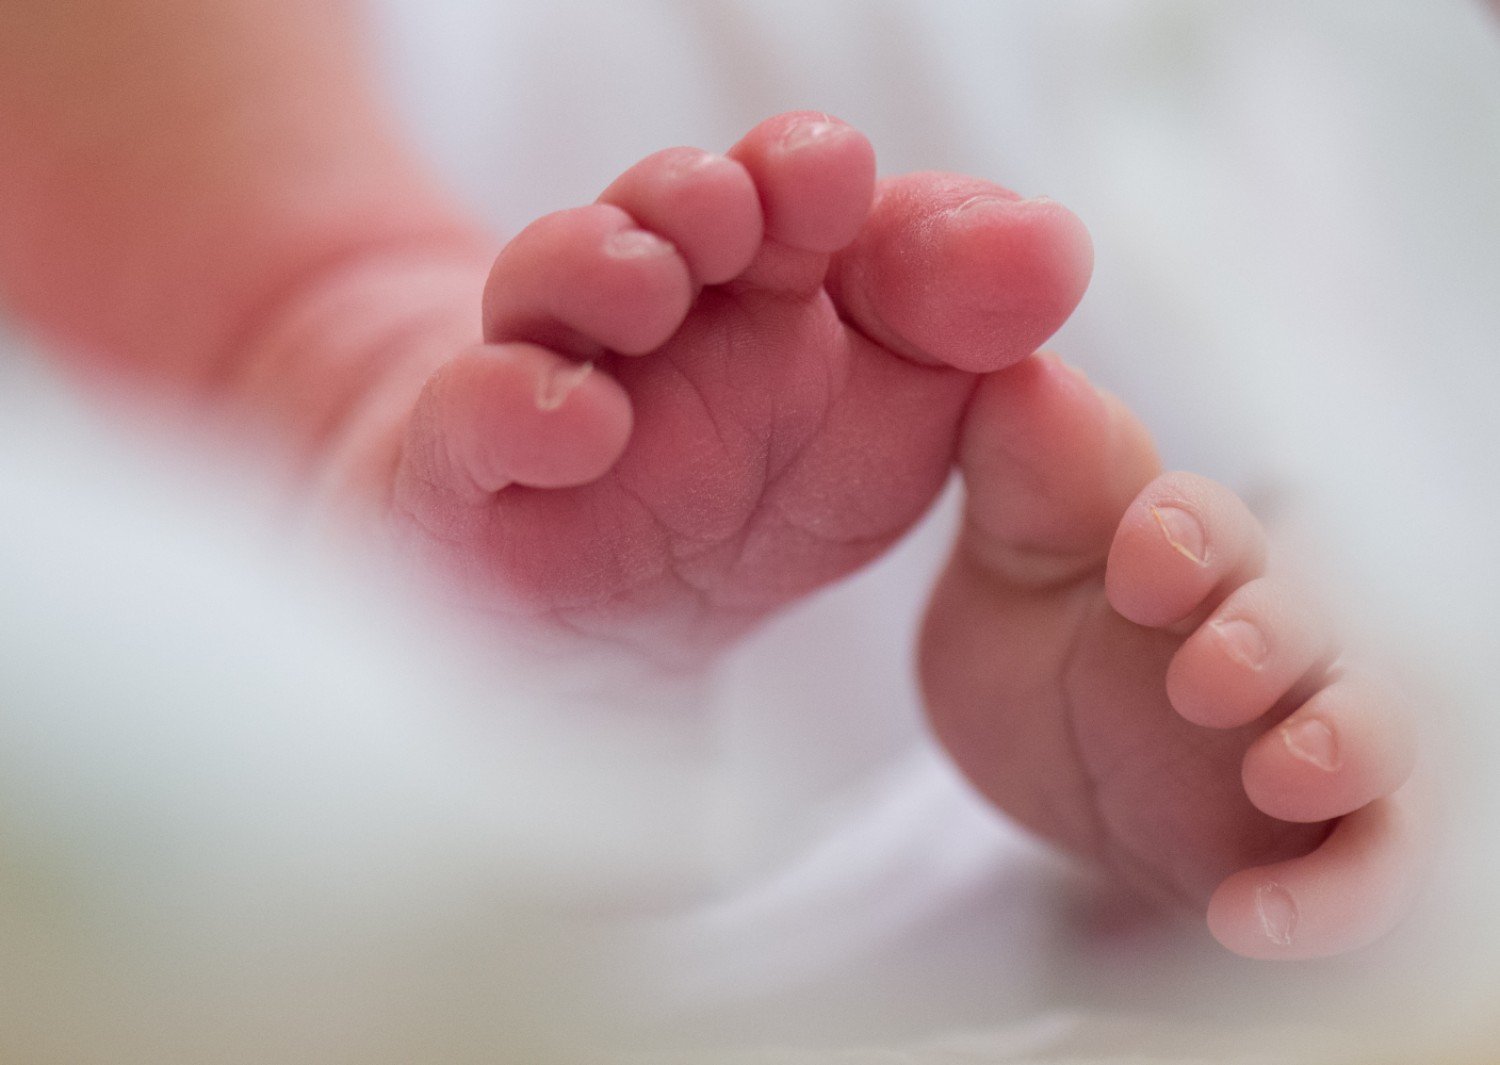 These are the unusual names parents in Germany are giving their newborns